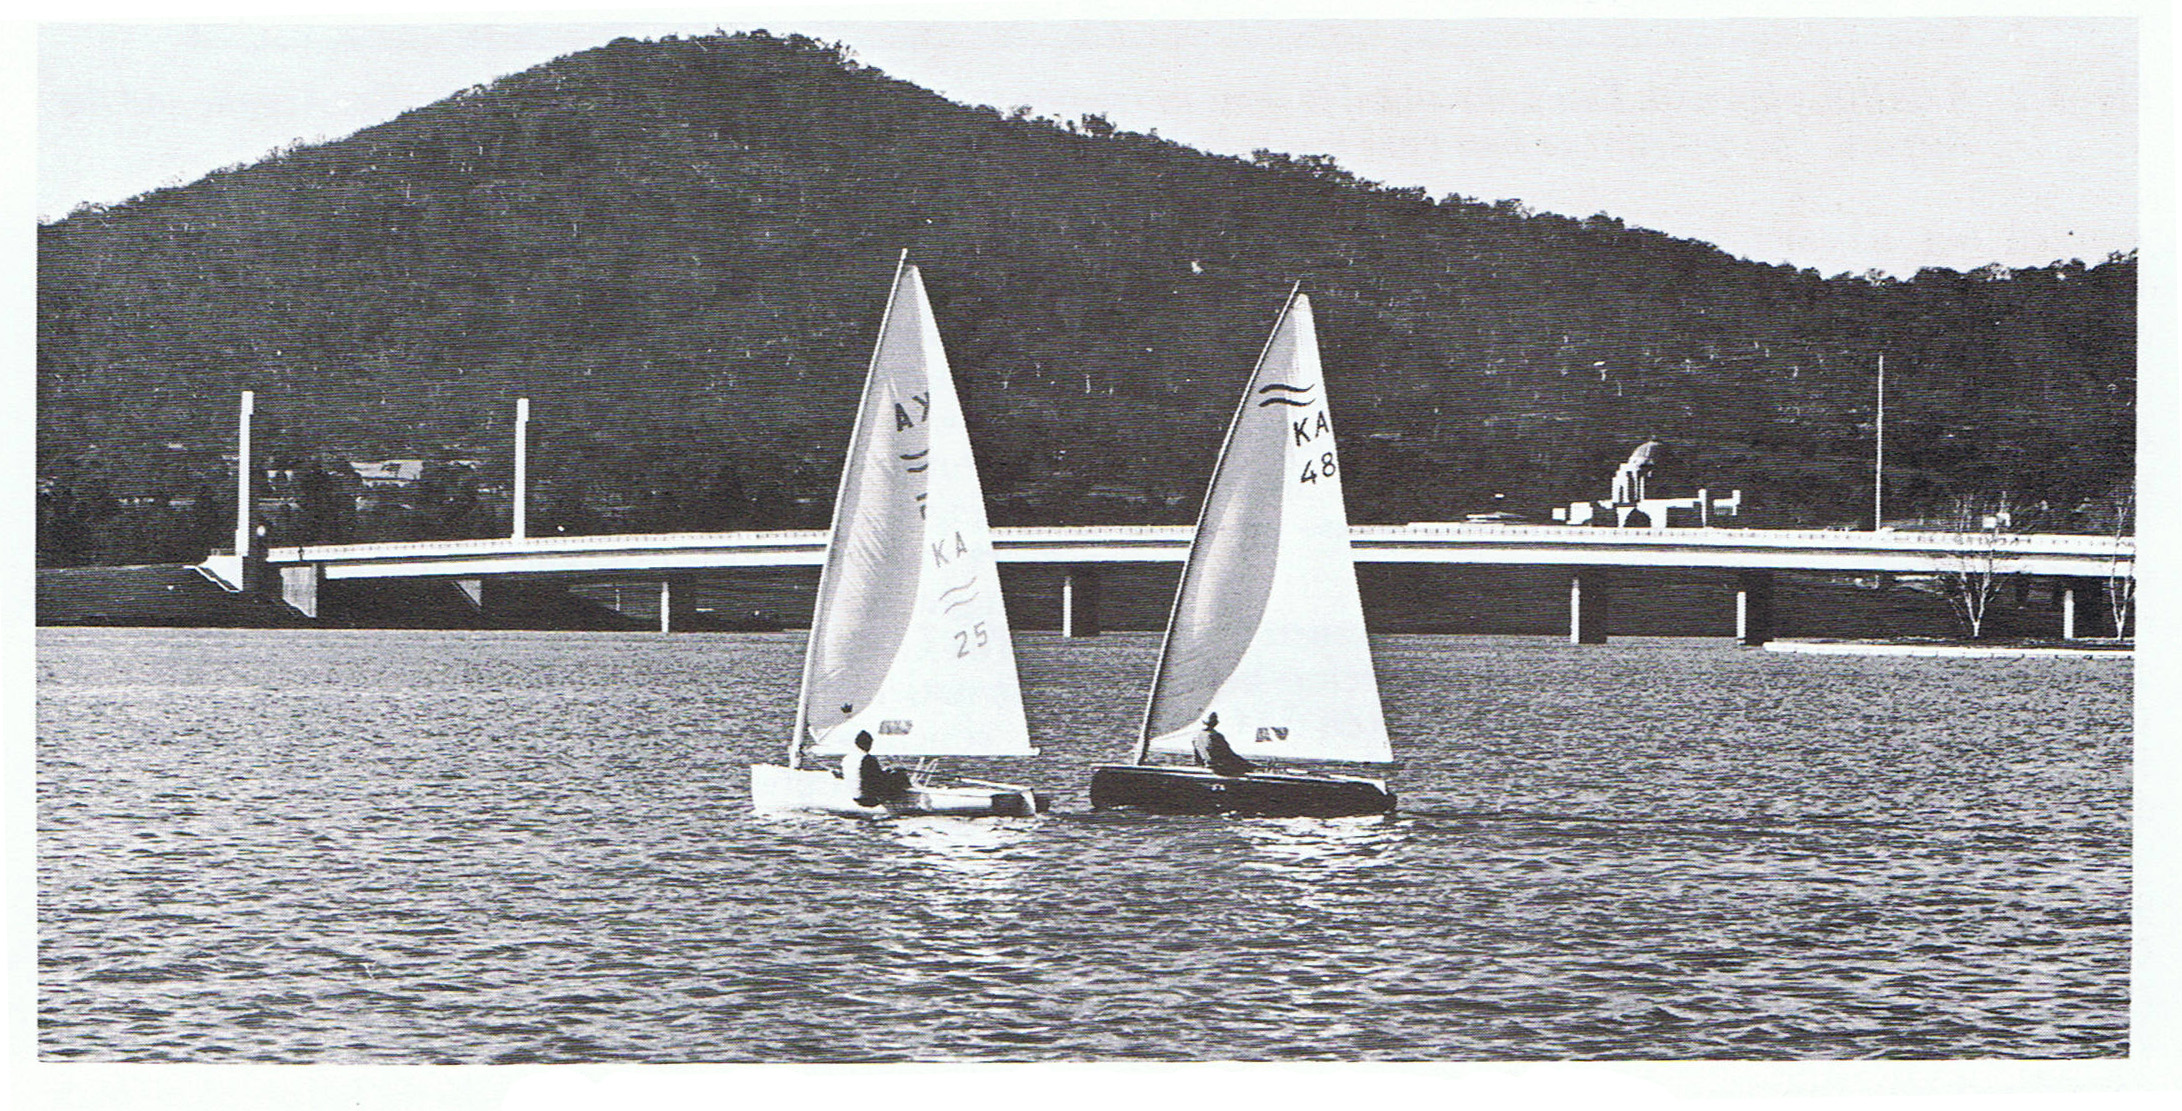 Sailing on Lake Burley Griffin